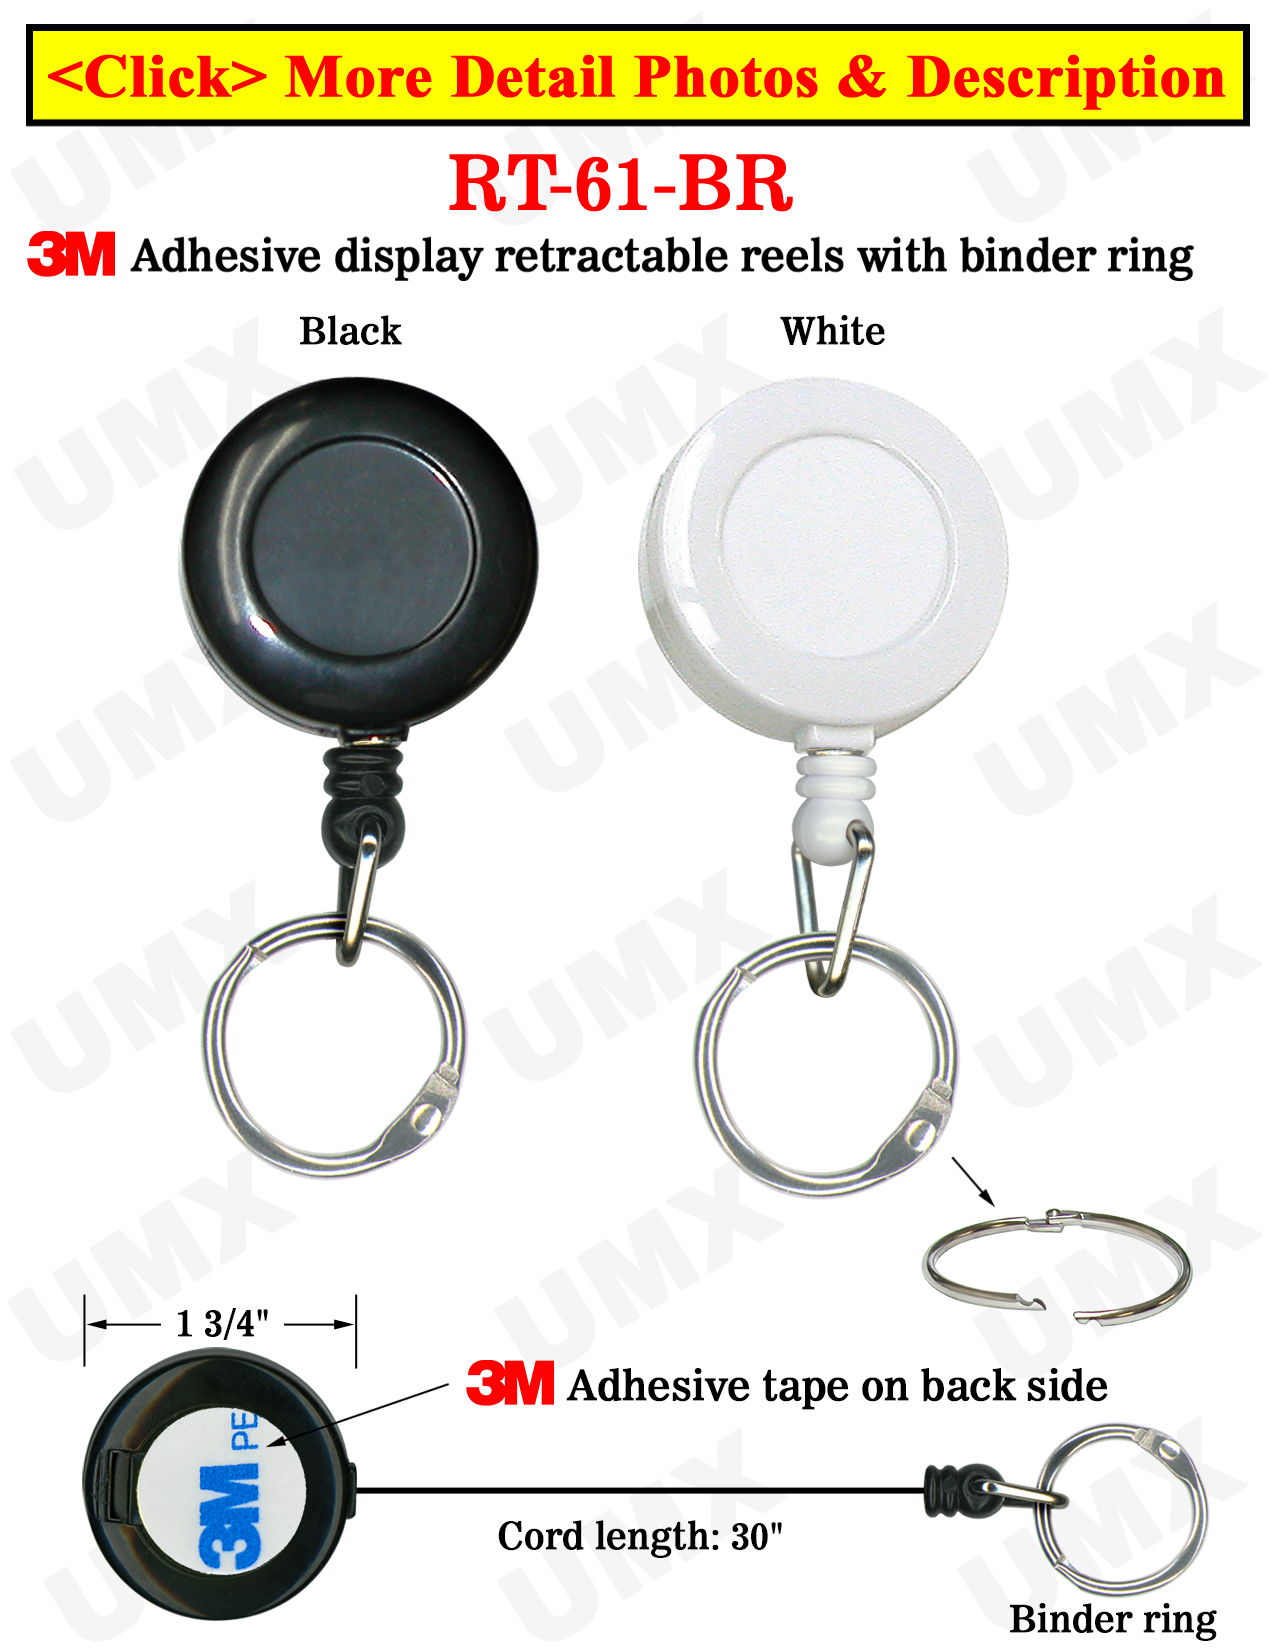 Low Cost Product Display Retractable Product Display Reels With Binder Rings and Adhesive Backing